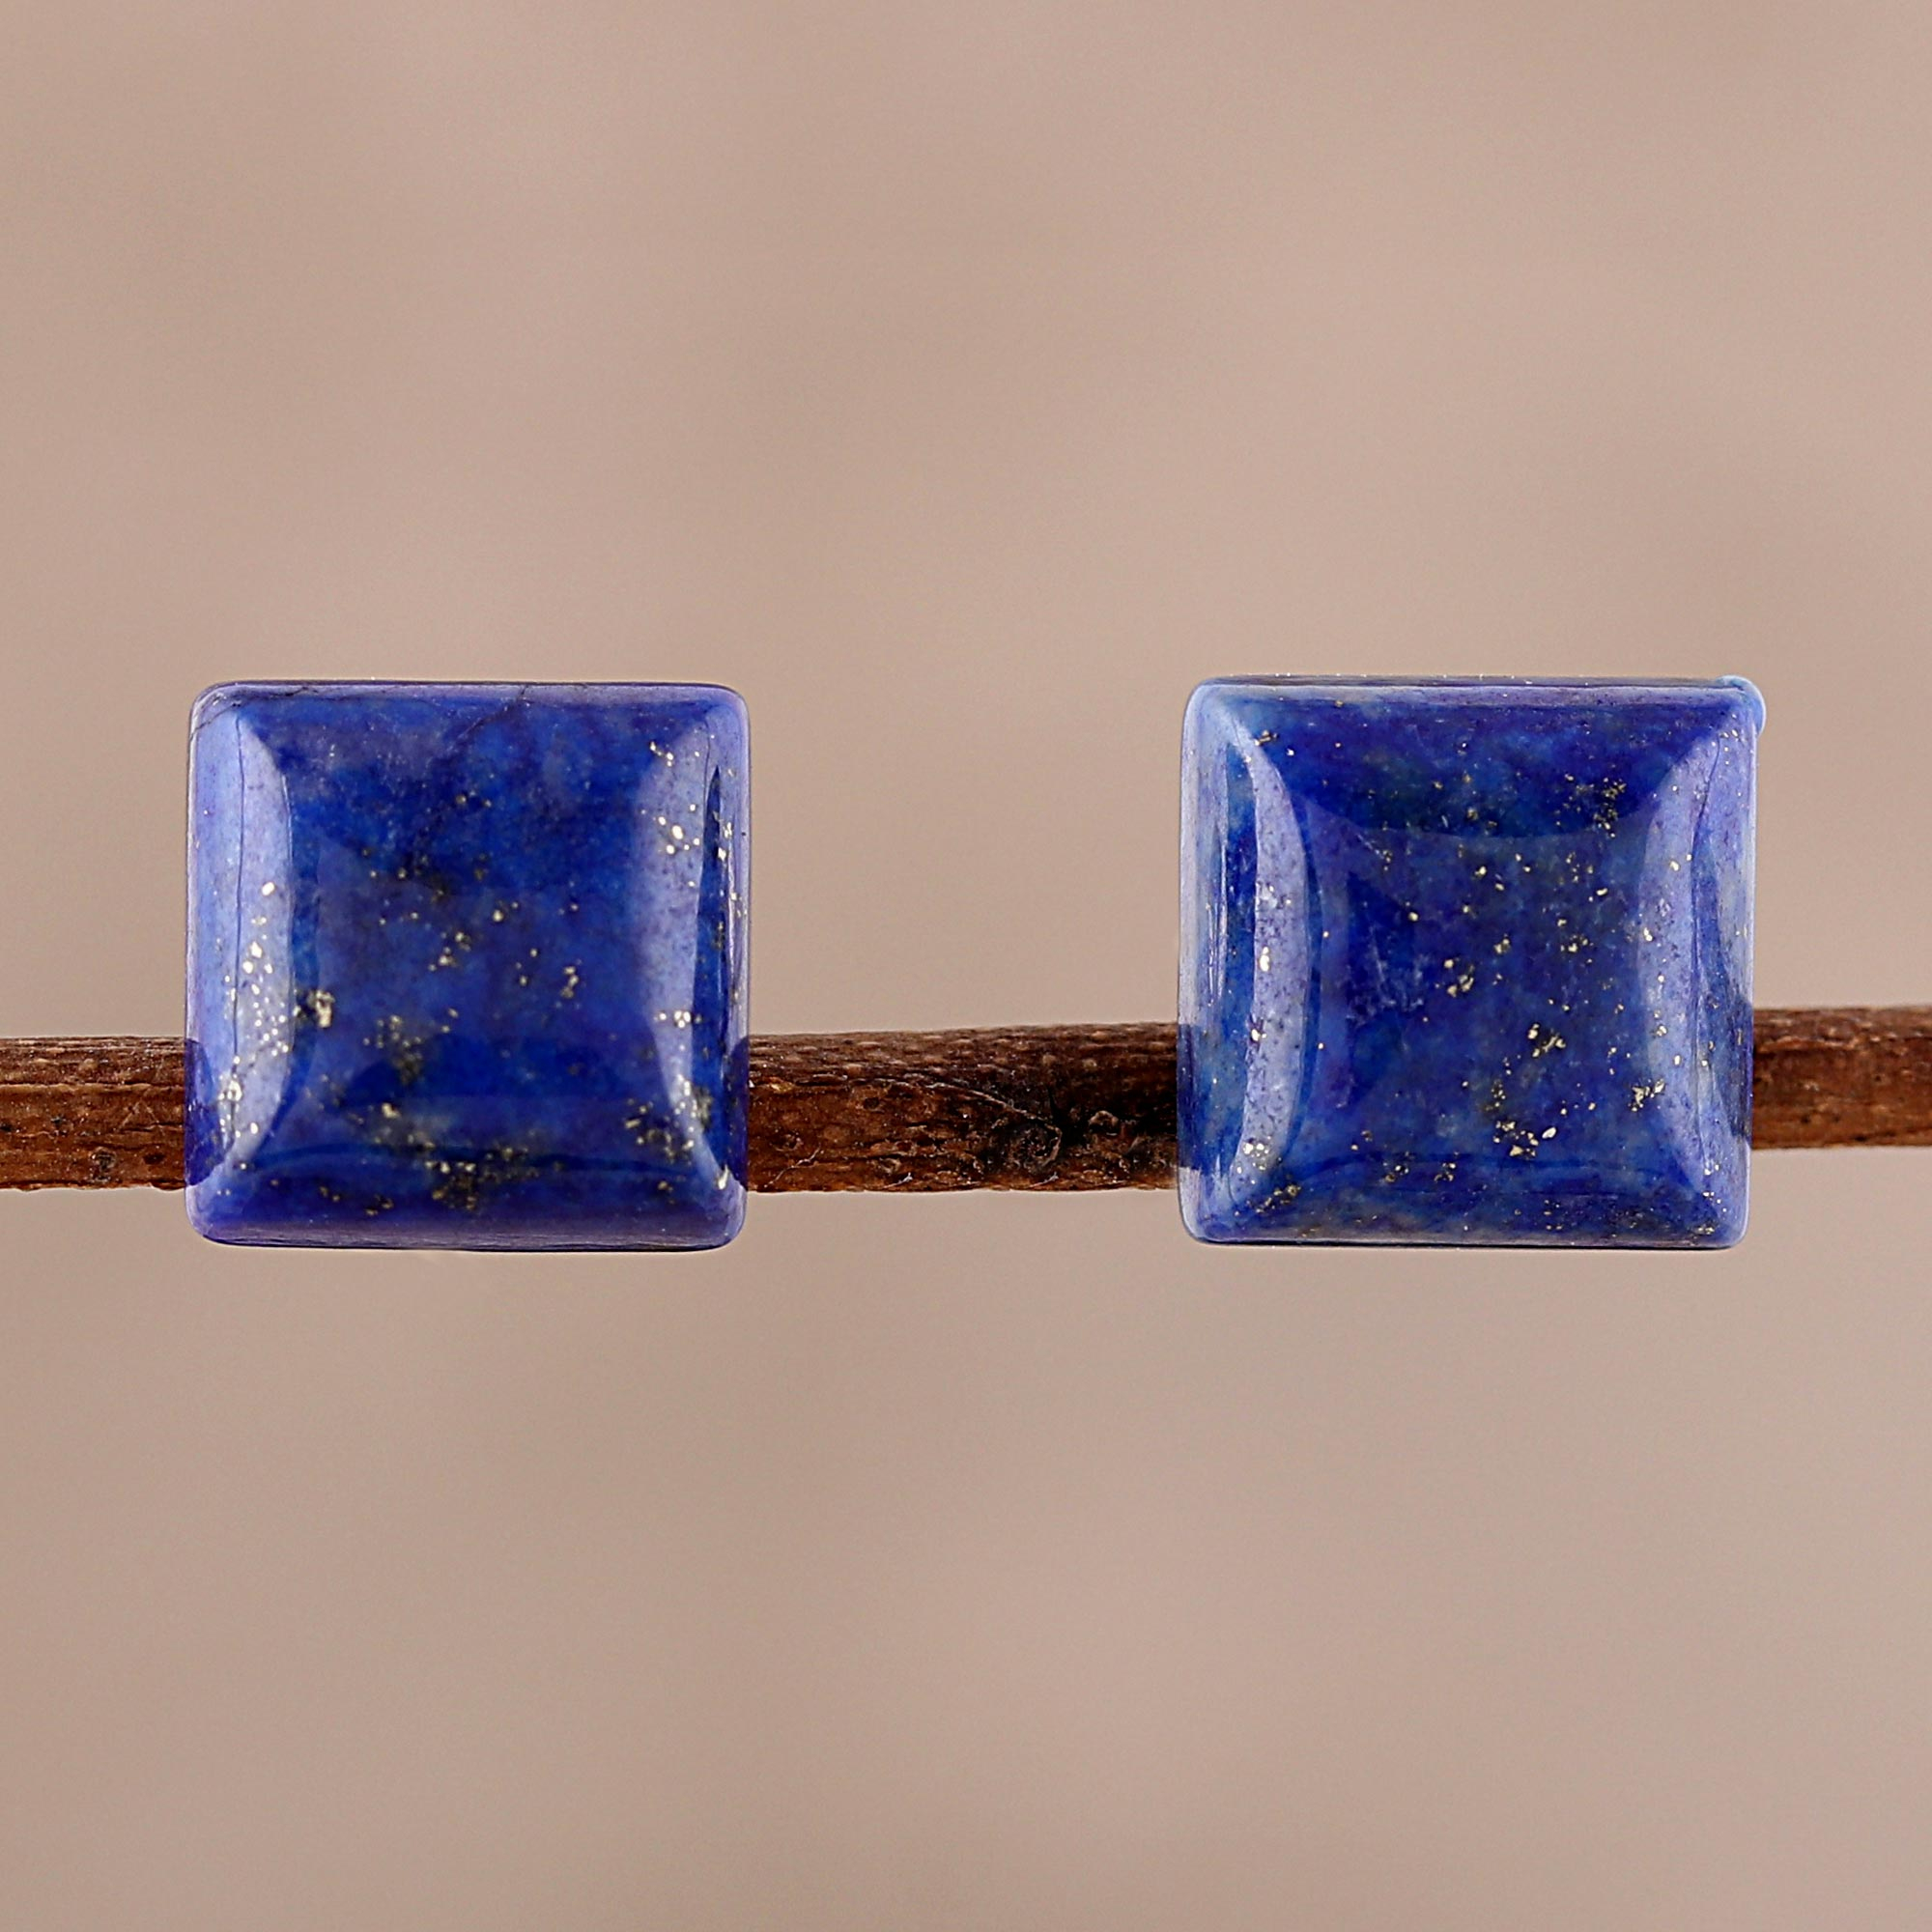 Sterling Silver Dyed Lapis Square Stud Earrings